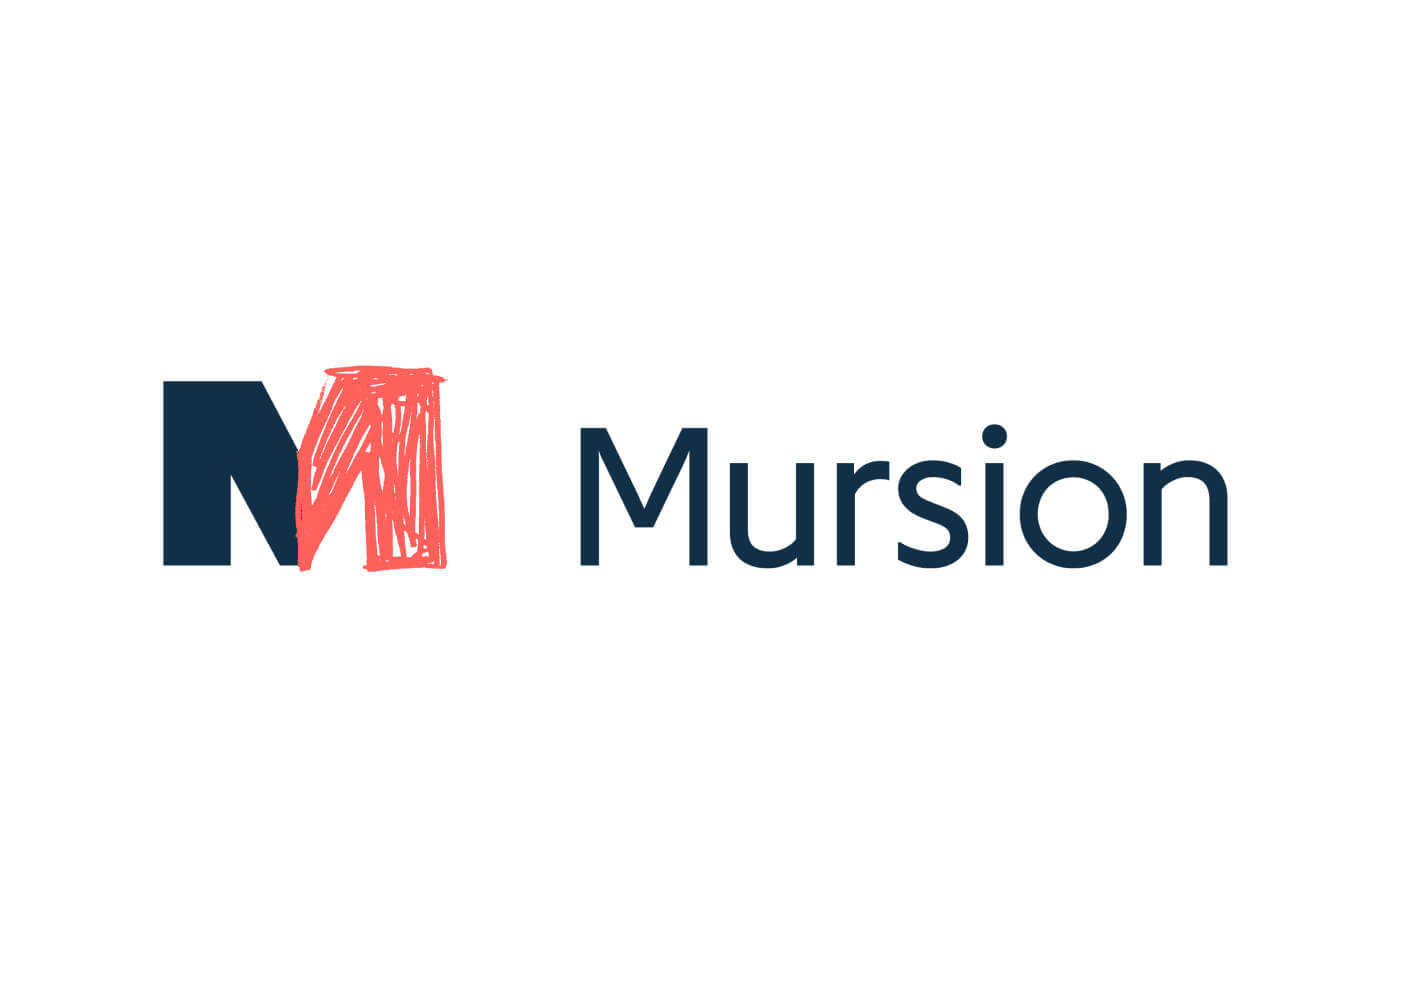 Meet With Mursion at DevLearn 2019 Oct. 23-25 in Las Vegas